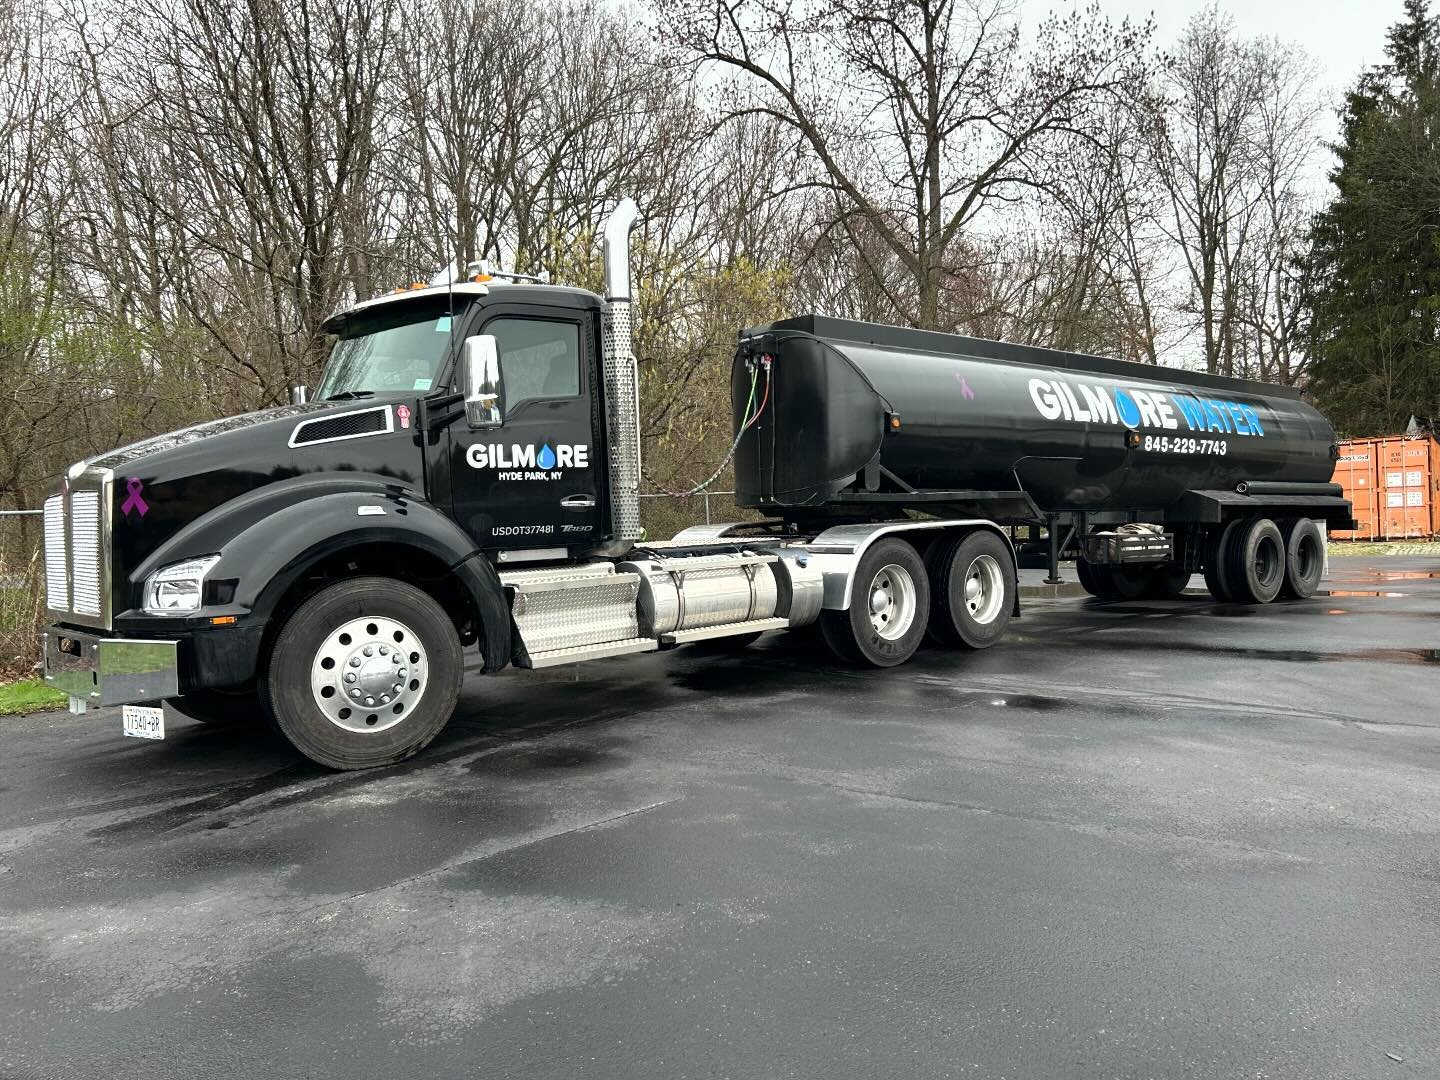 She&rsquo;s a beauty, Added some flare to this 33ft water tanker for  Gilmore Water 💧 
.
.
.
.
#dbgraphics #wrappedbydb #dbbylooker #looker #lookervinylco #wrapped #vinylwrap #vinylwraps #vinylwrapping #carwrap #3m #avery  #paintisdead #wraps #custo